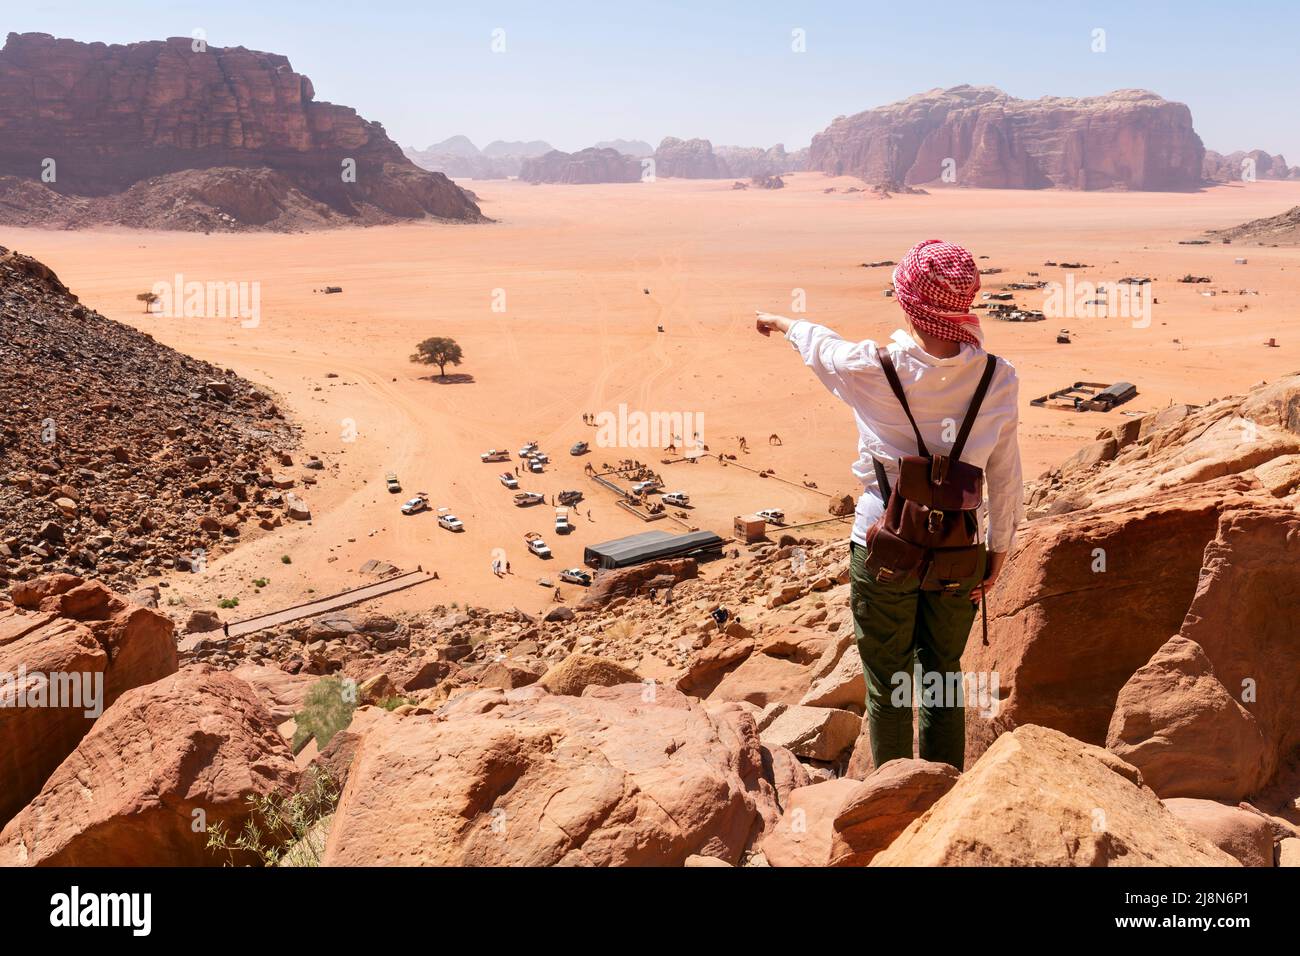 A tourist standing by the look out of a panoramic view of the desert in Wadi Rum, Jordan, Middle East. Stock Photo